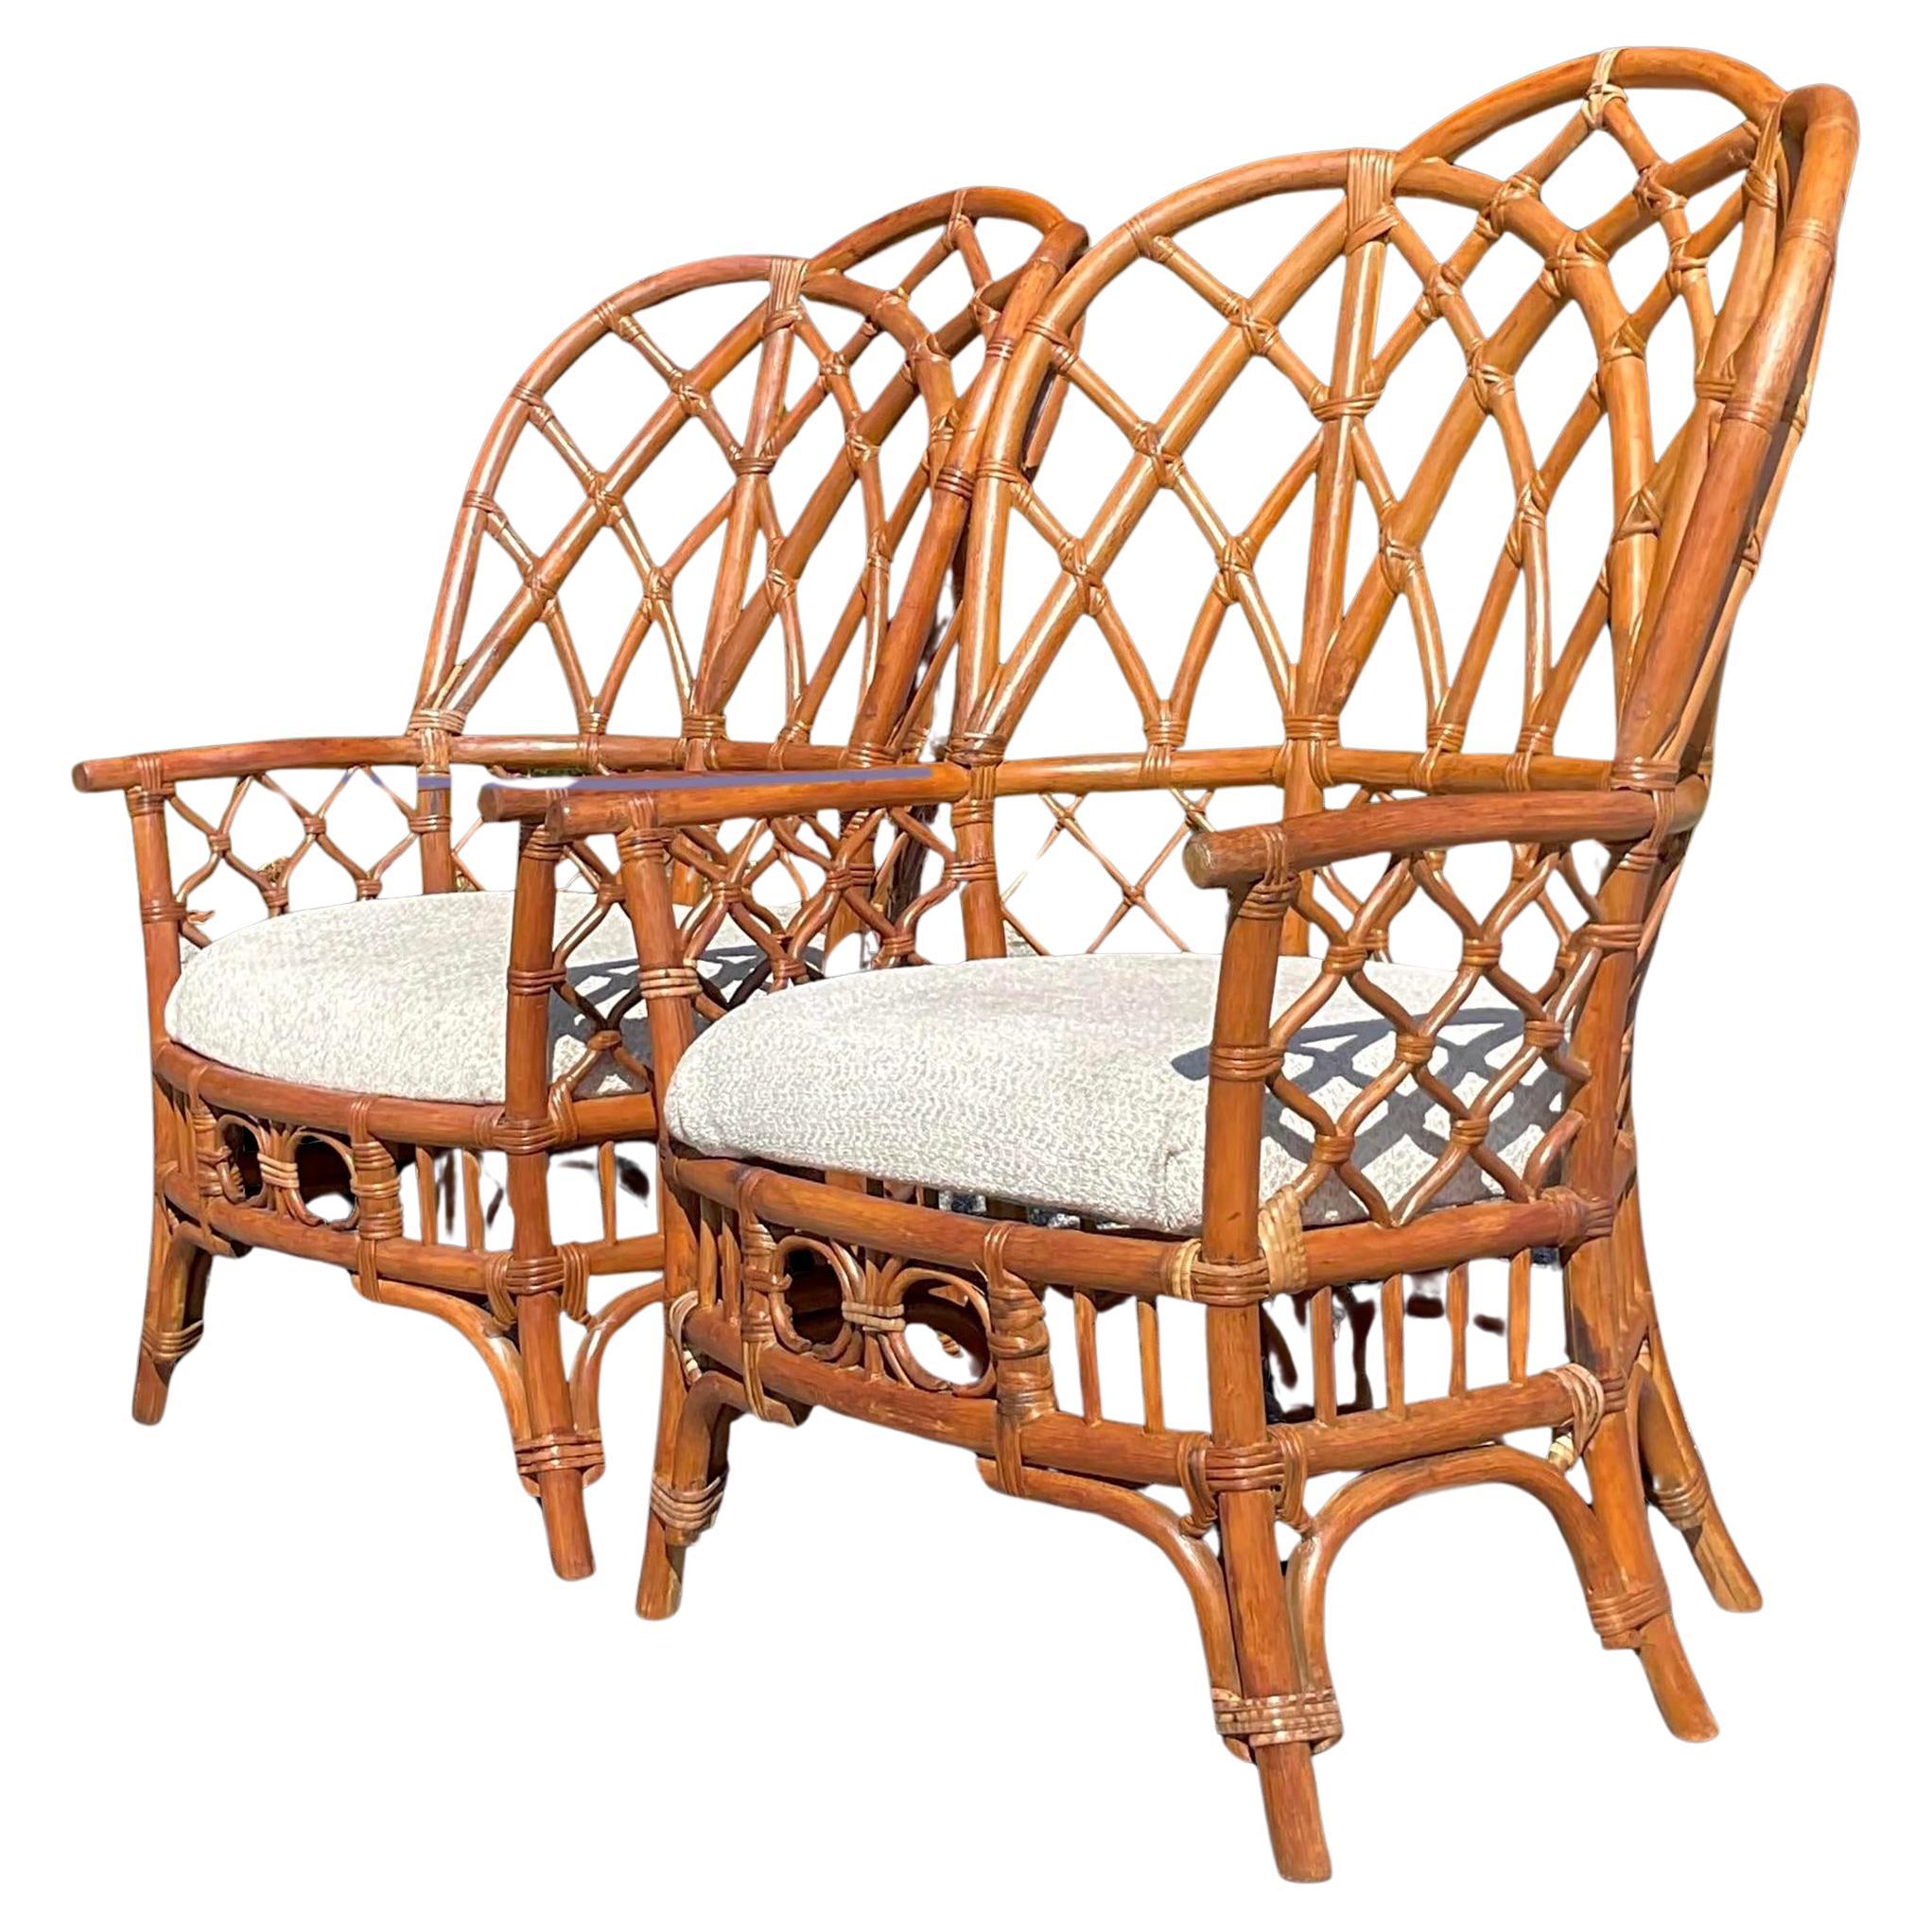 Late 20th Century Vintage Coastal Bent Rattan Wingback Chairs - a Pair For Sale